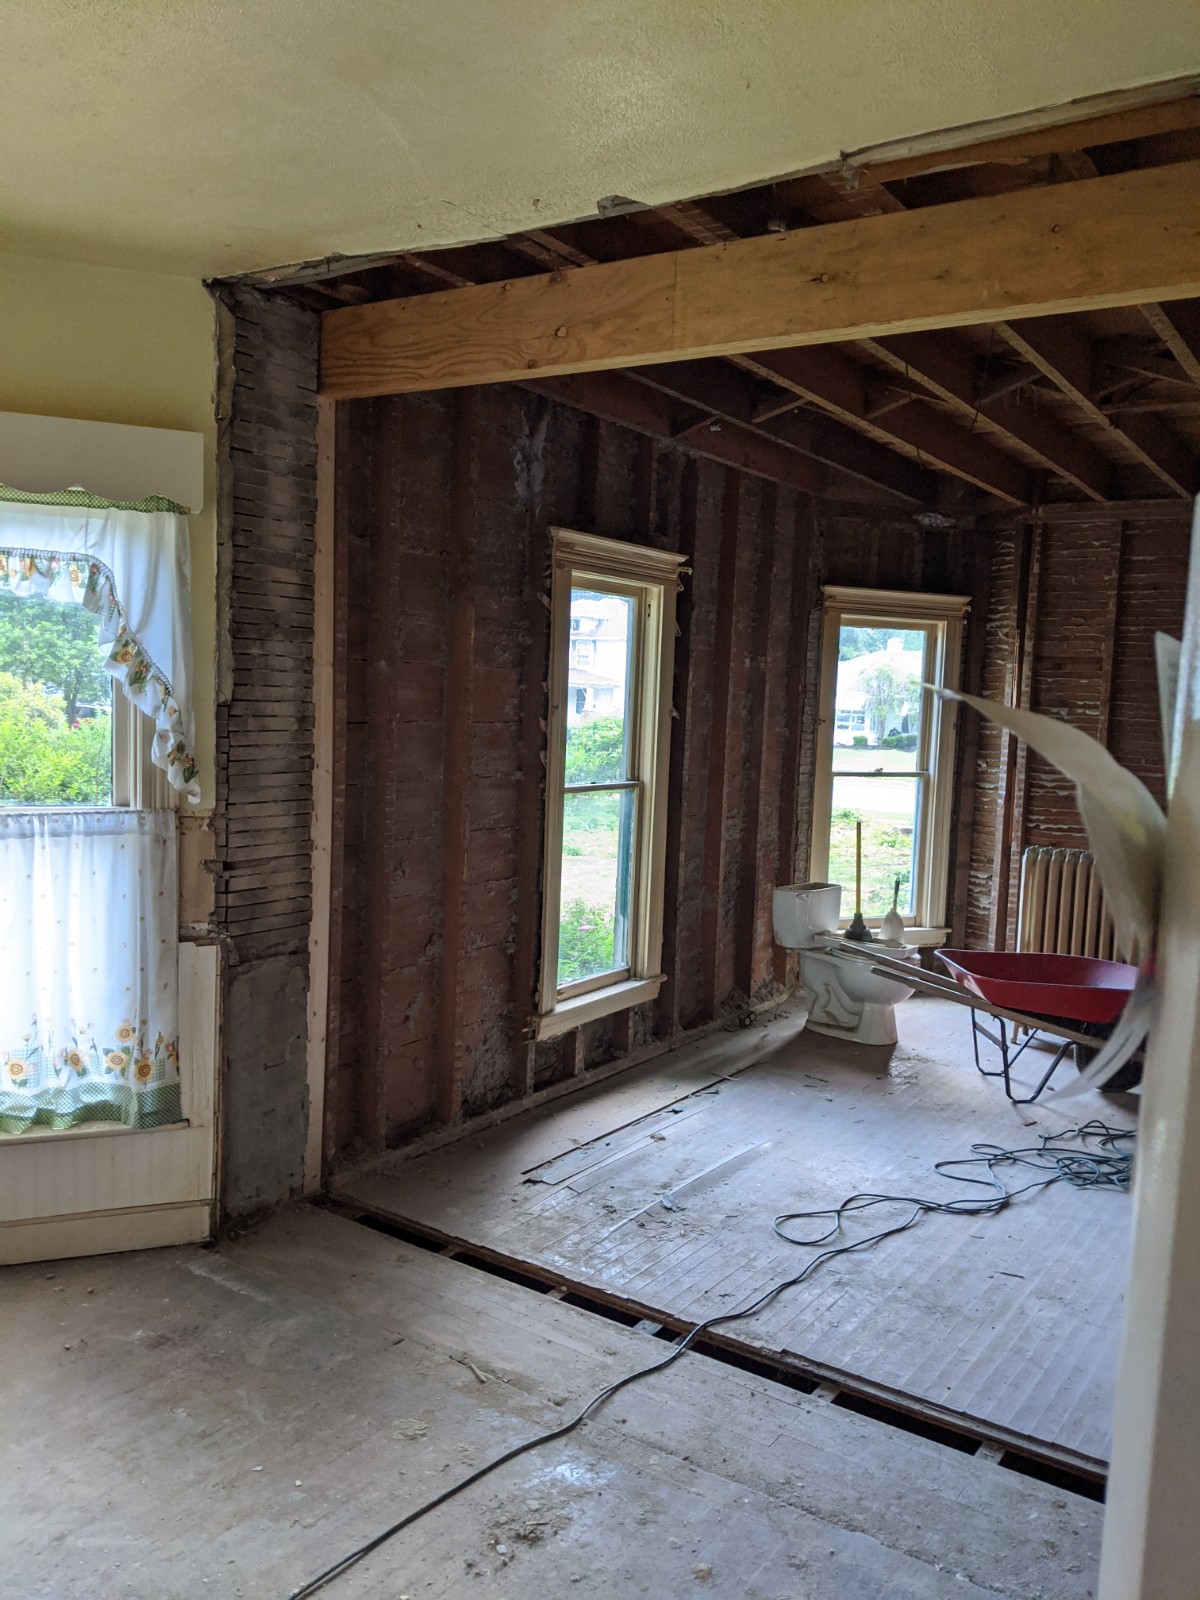 Another view of the wall removed between the kitchen and dining room.